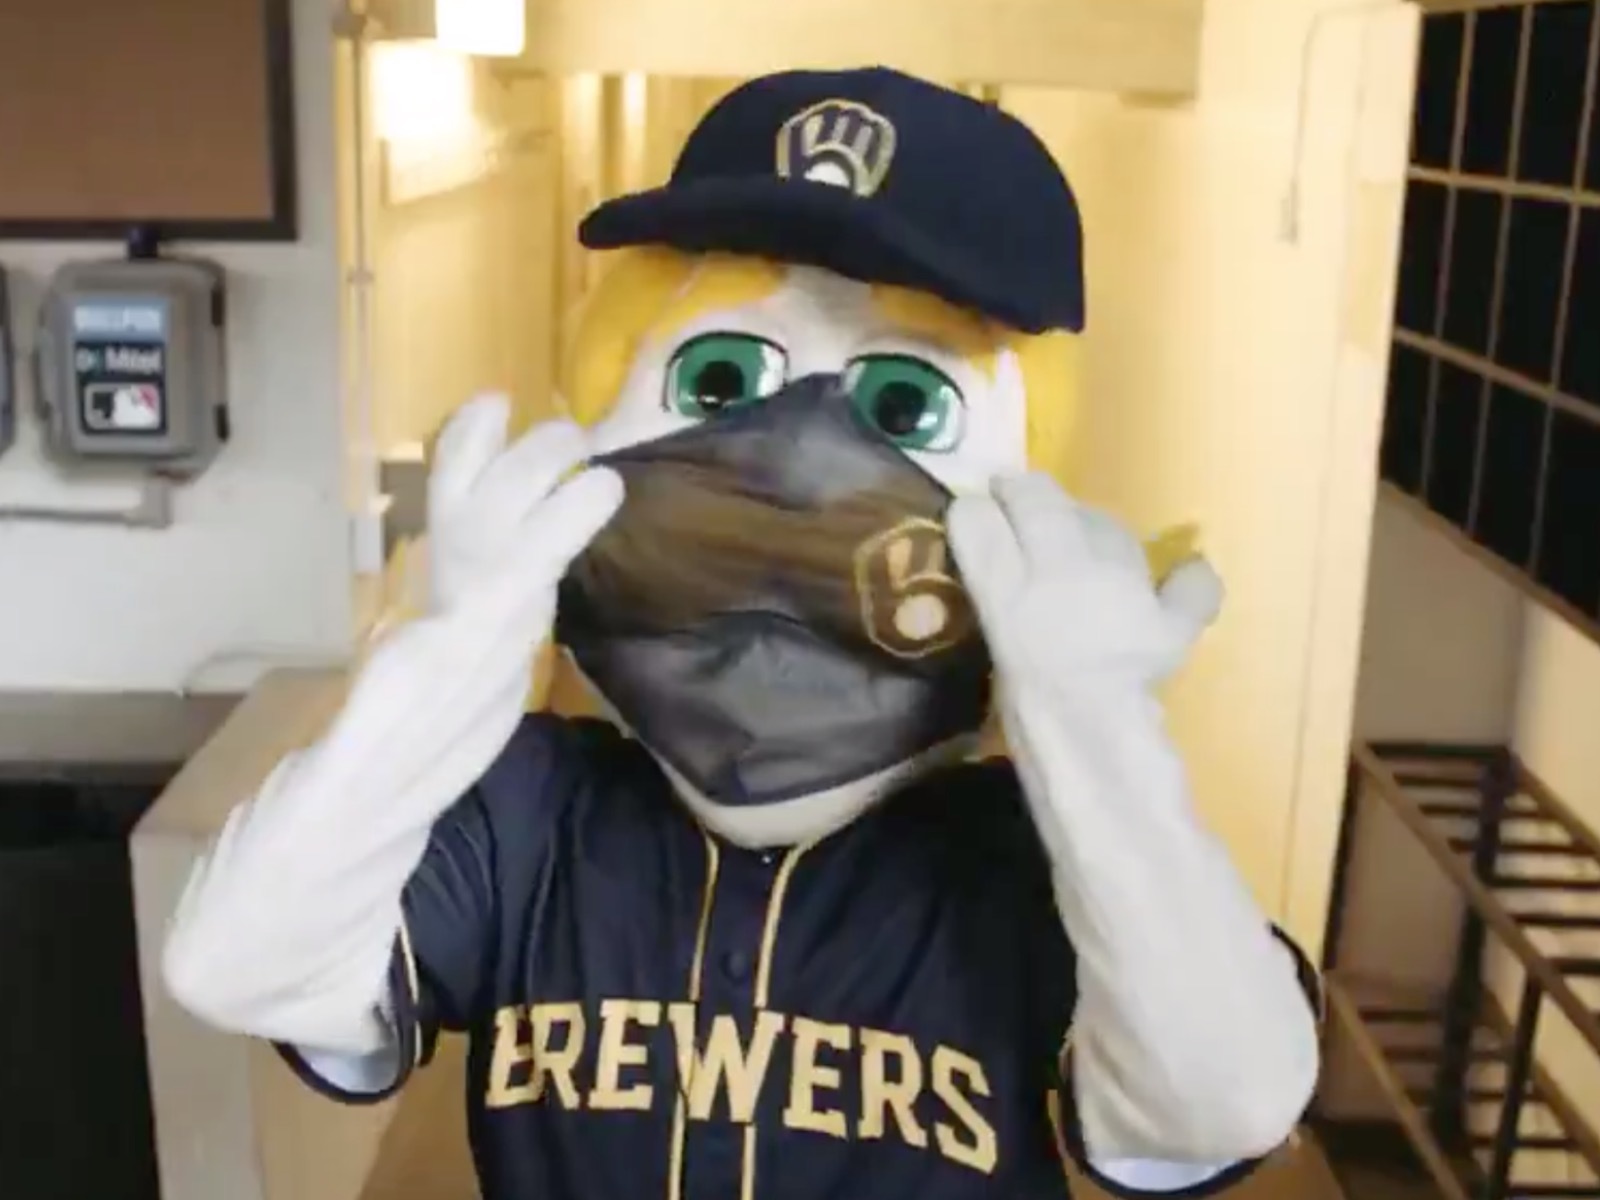 Here's the result of the Brewers' Mascot Makeover: a new